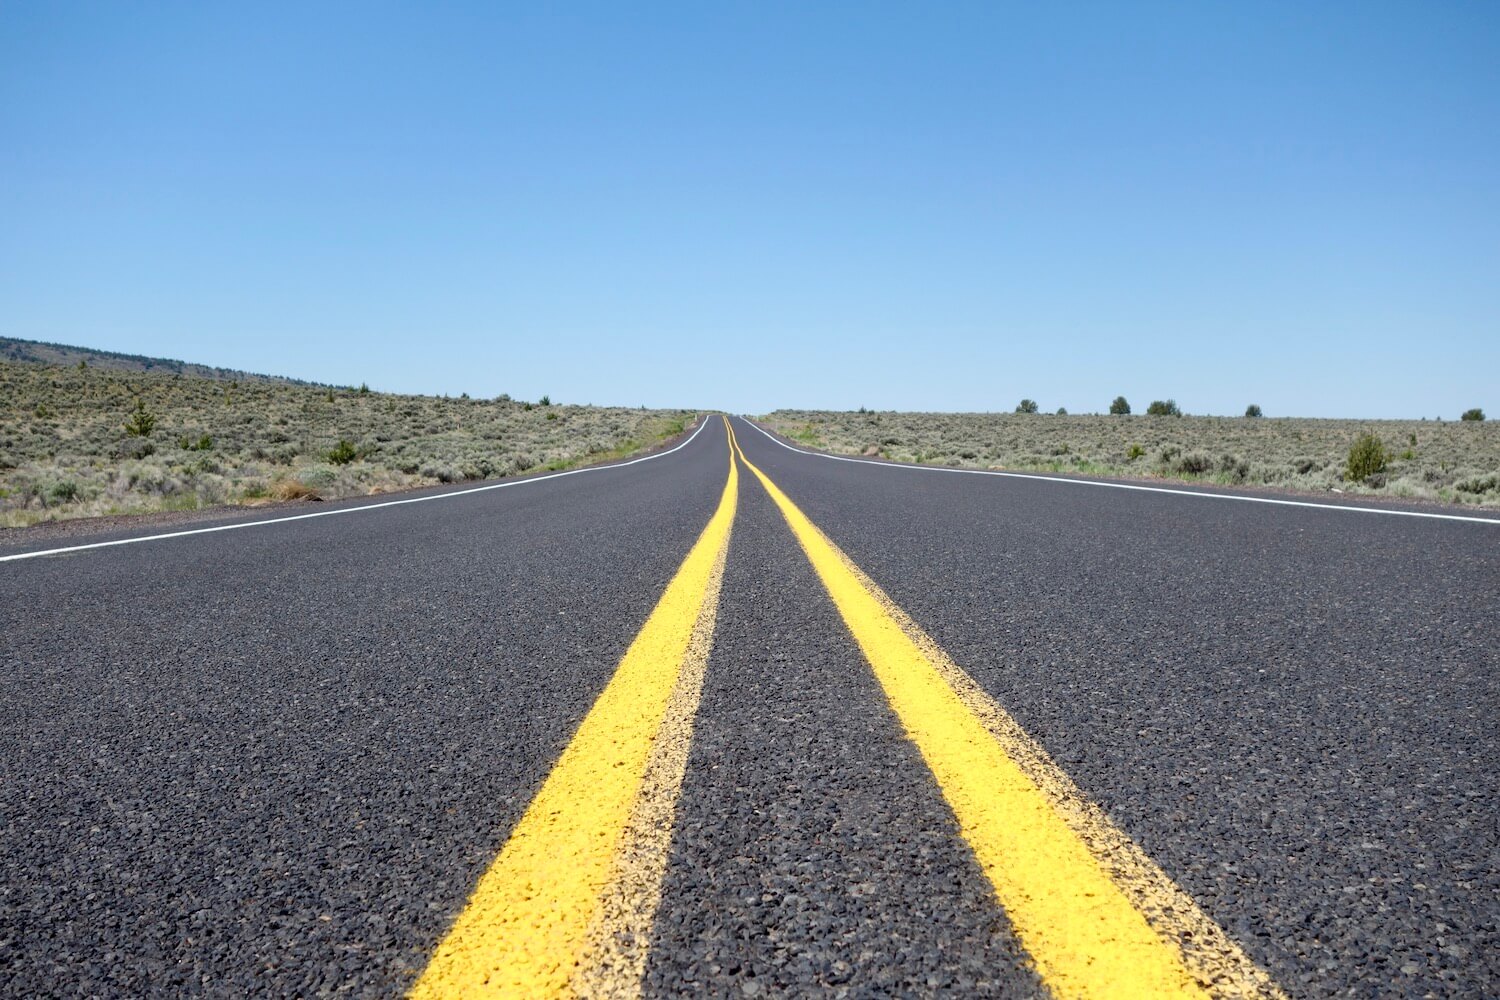 Two solid yellow lines flow through this photo leading away down a lonely blacktop highway in Eastern Oregon.  The sky is blue and the grassy terrain on either side is flat. 